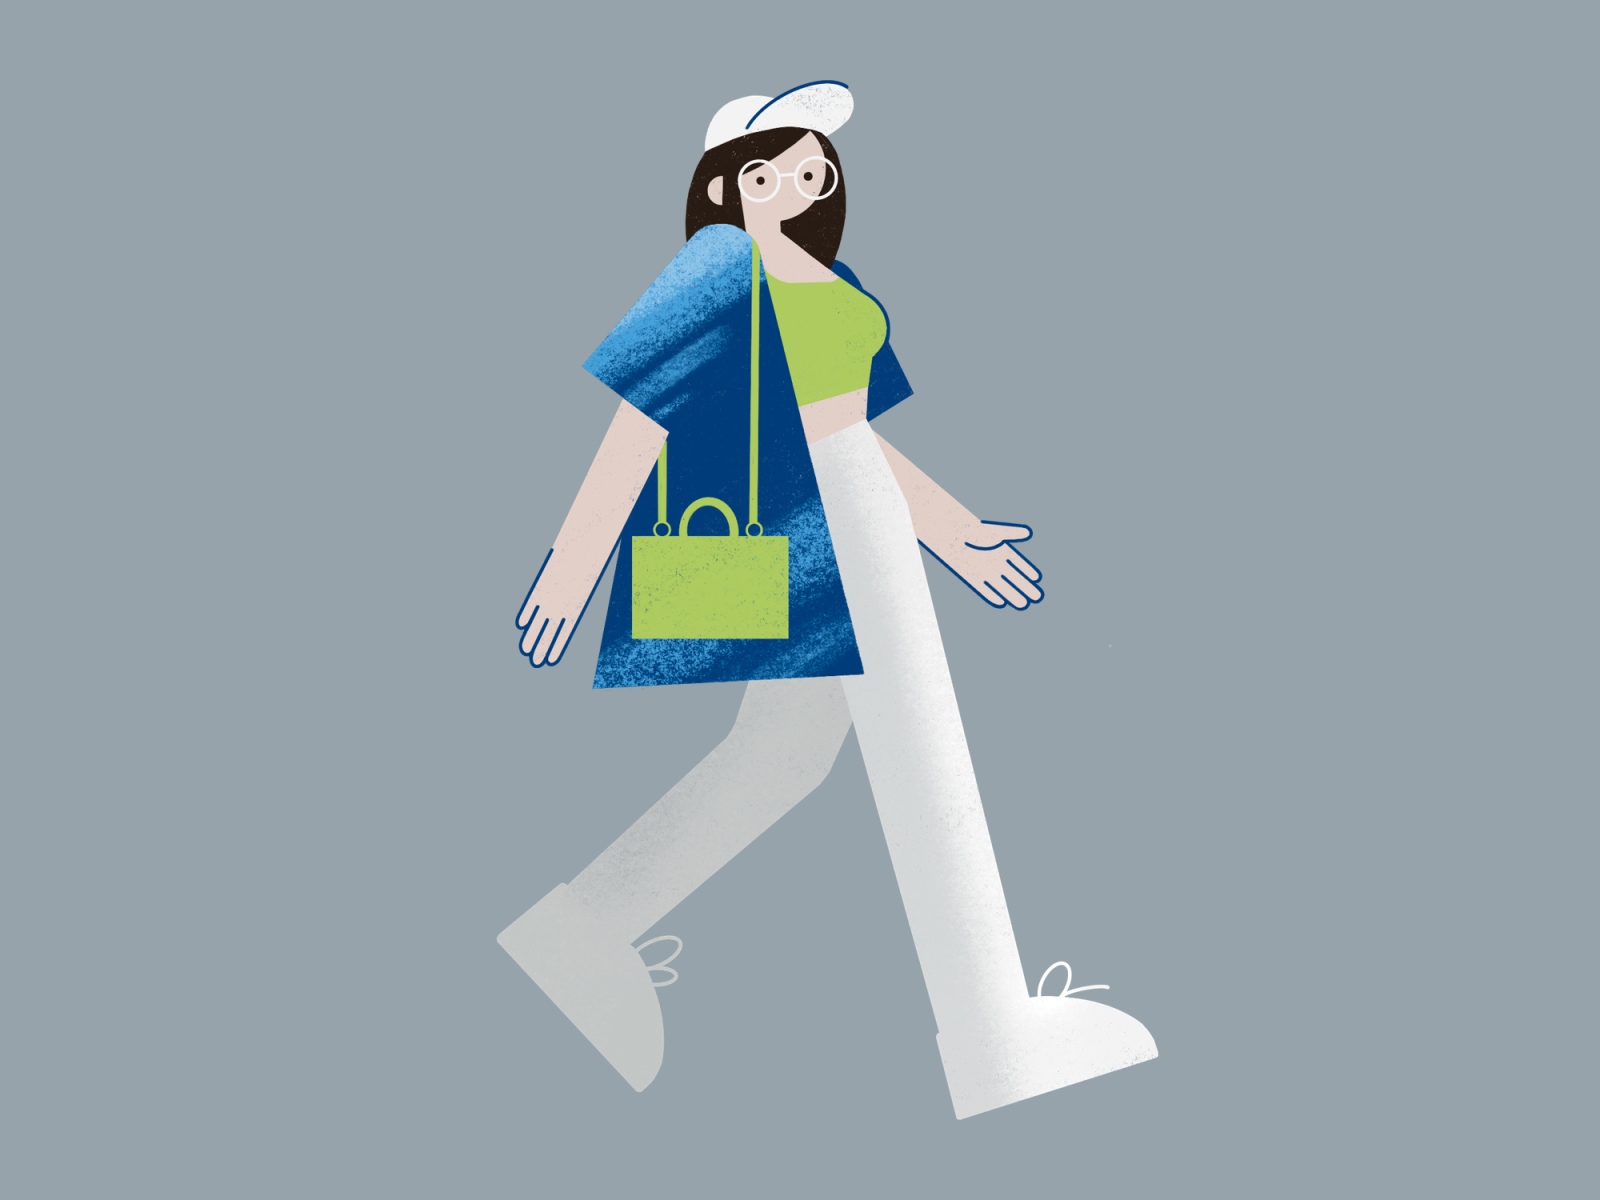 Summer Outfit Illustration by Palilulla on Dribbble